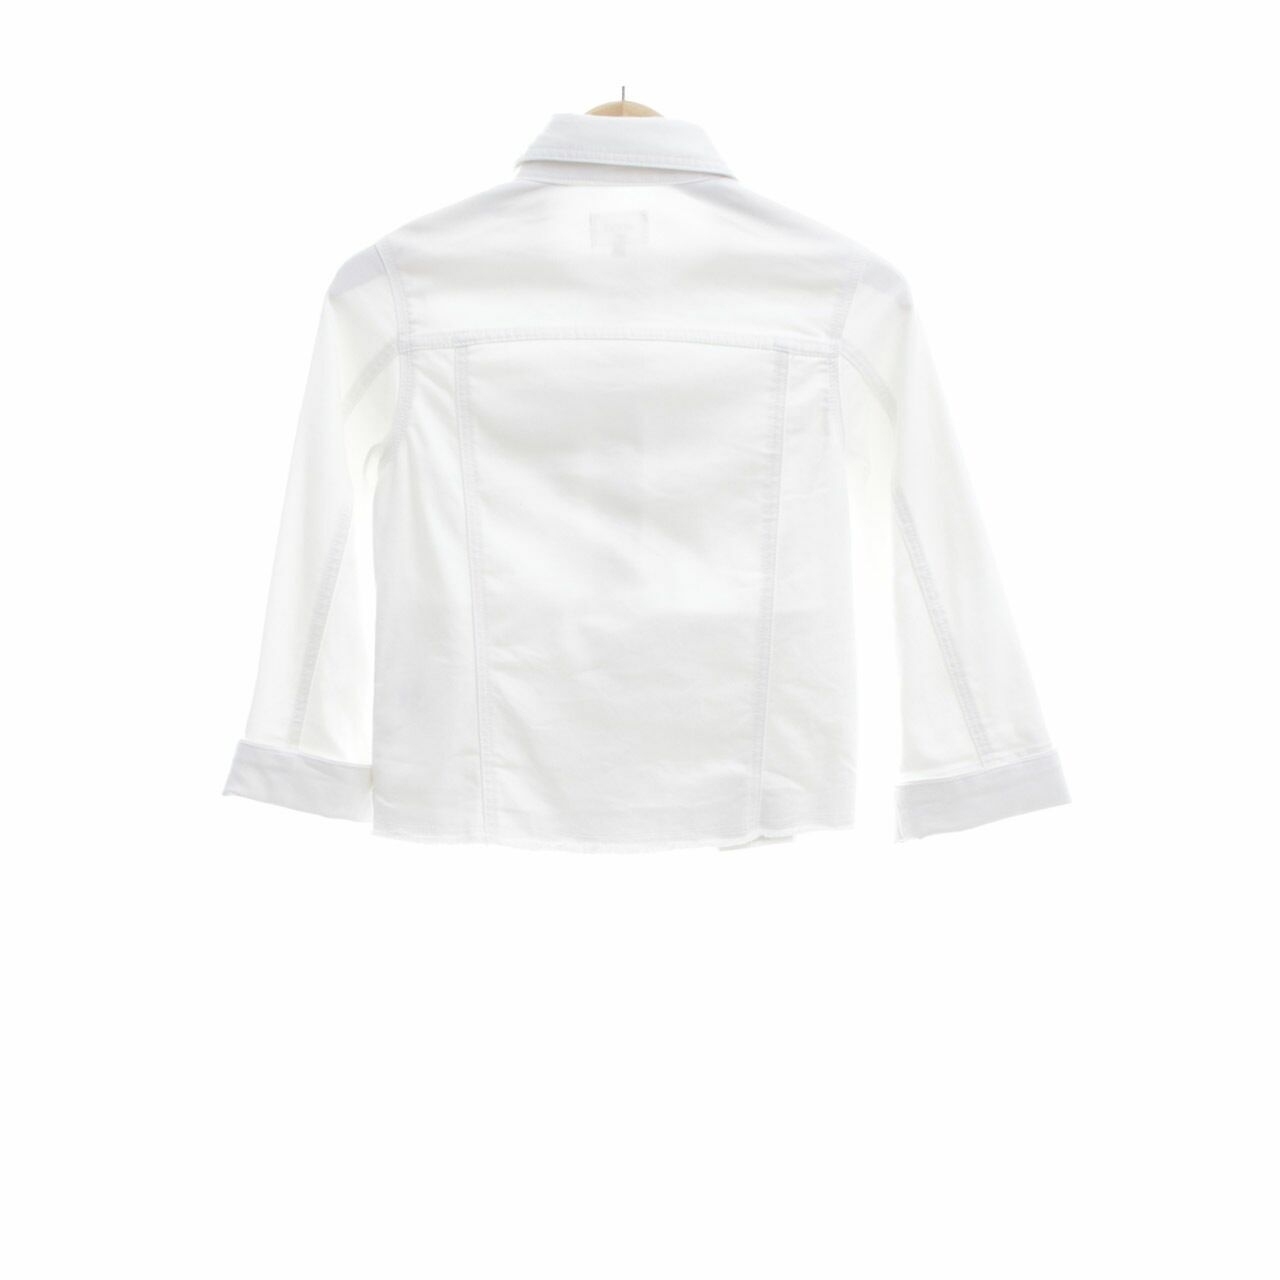 SEED Off White Jacket